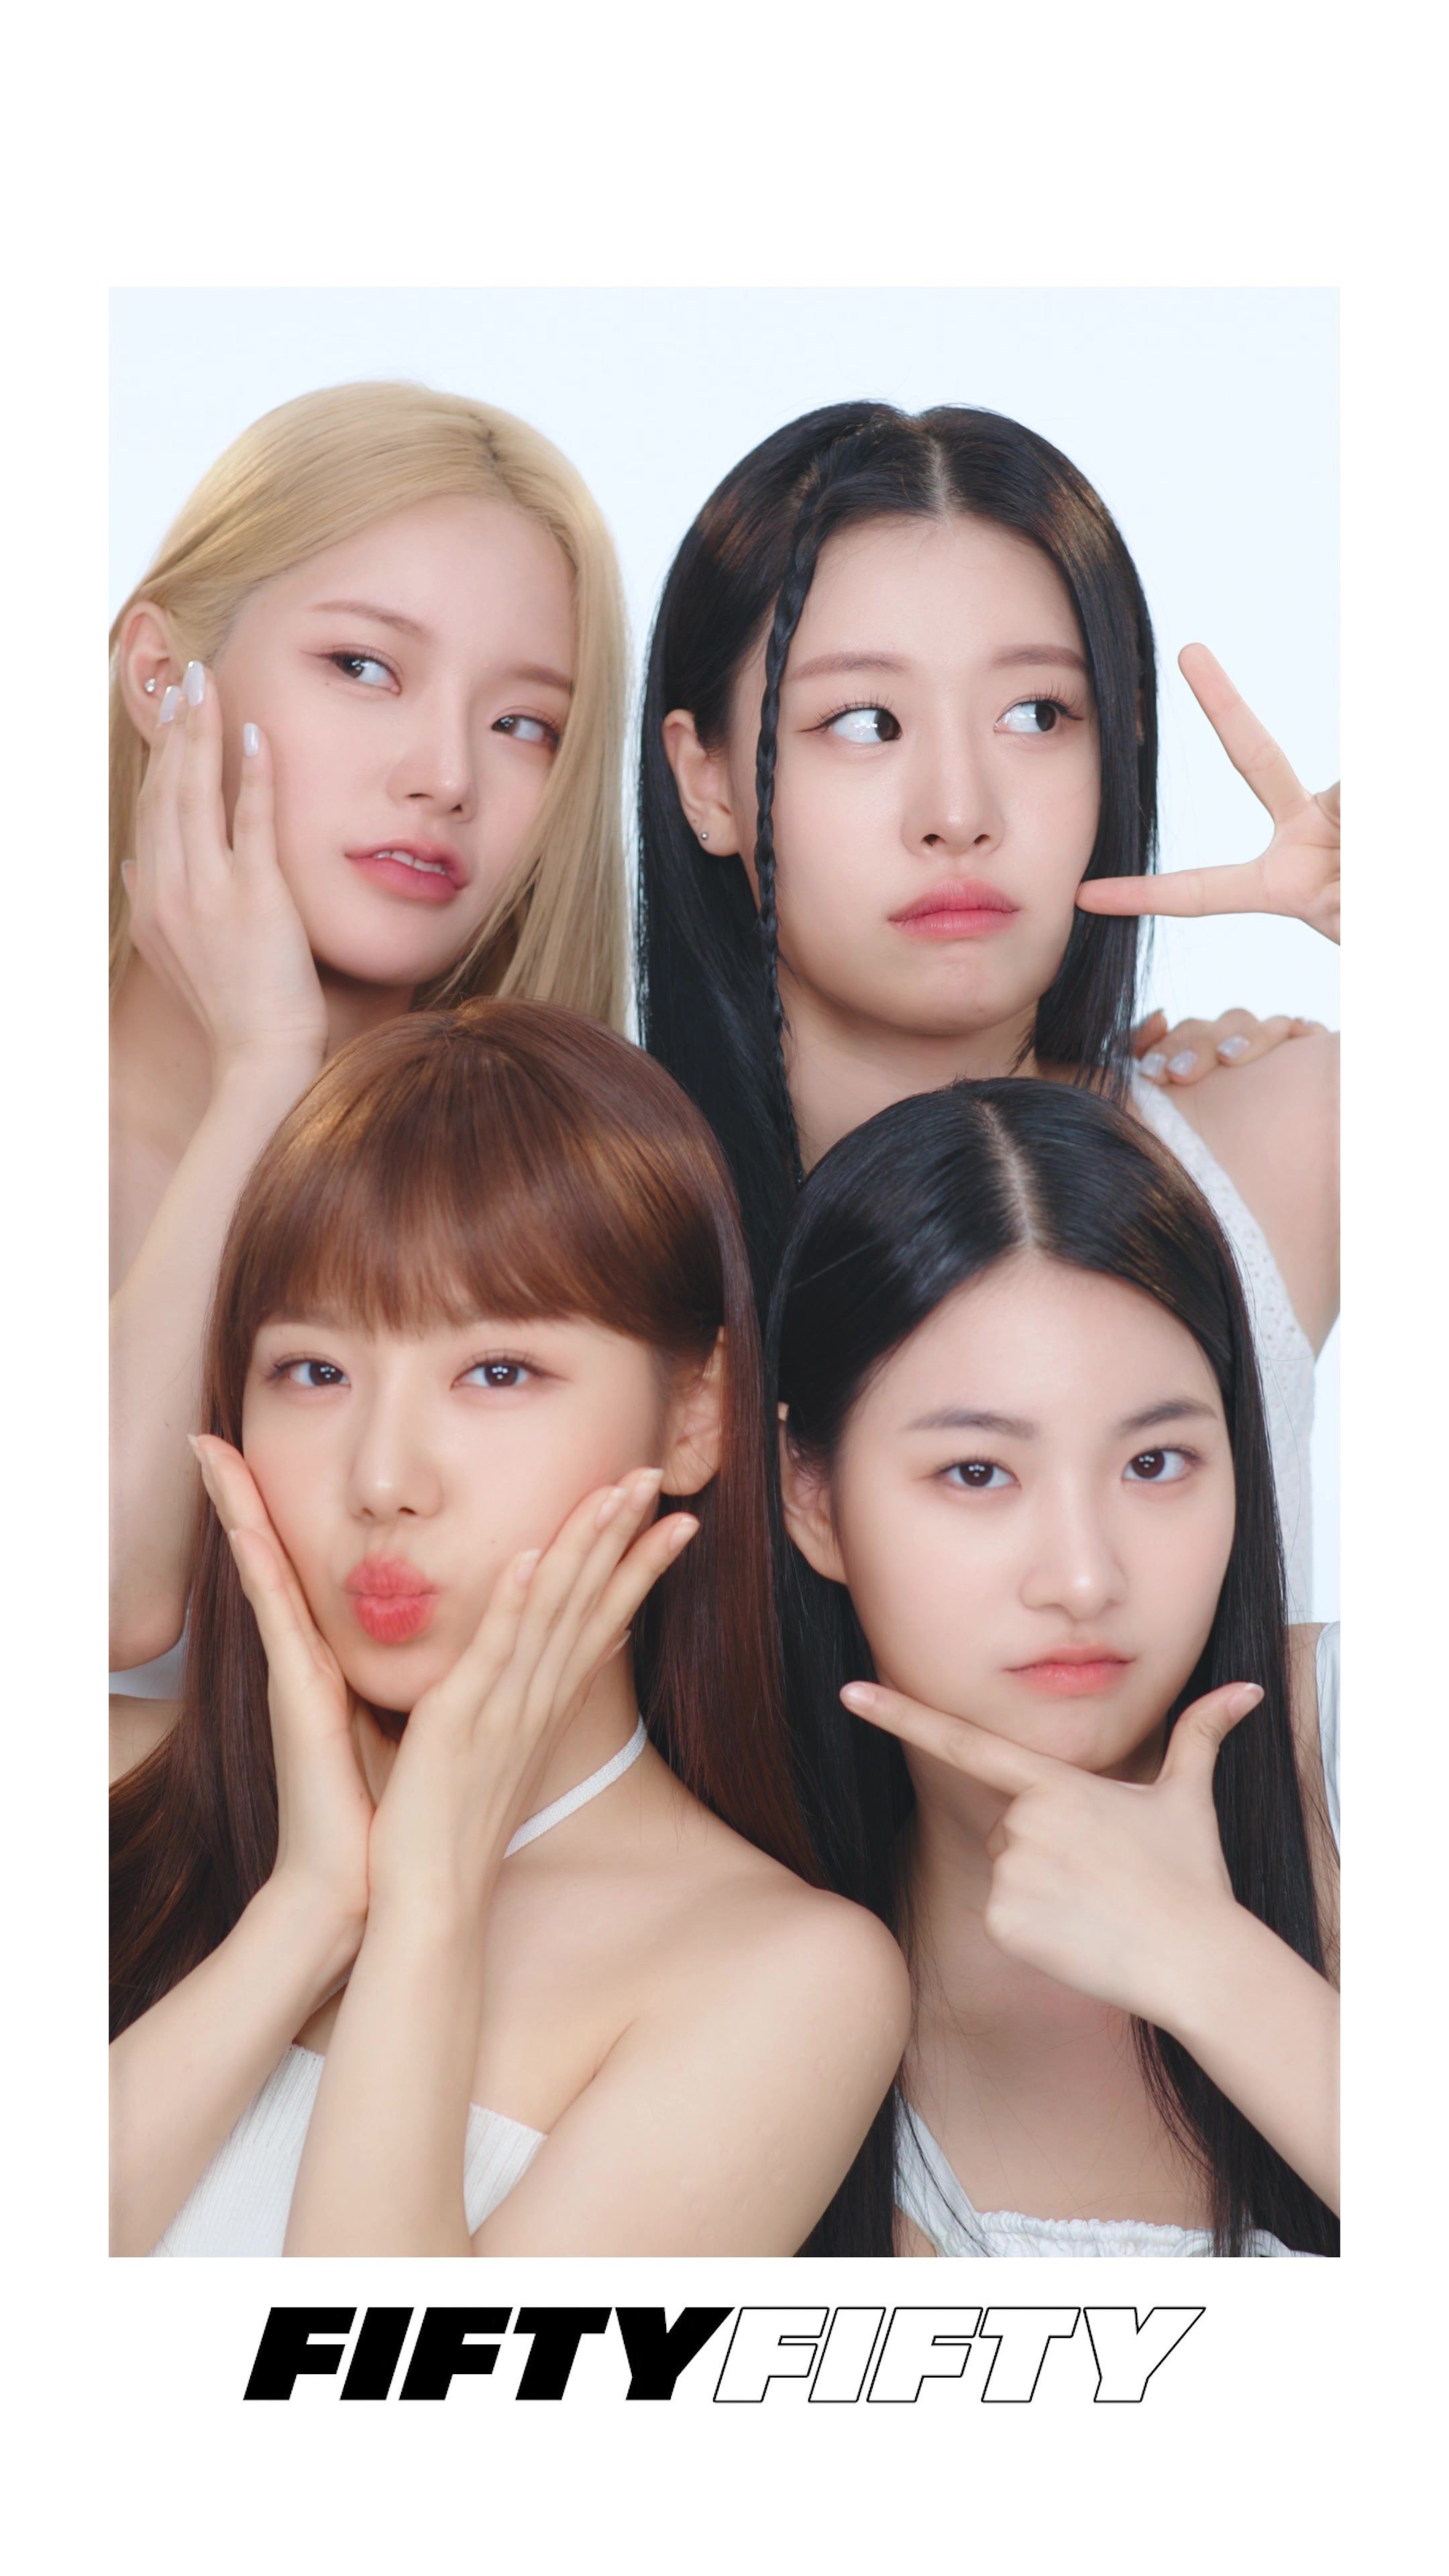 A portrait of the members of Blackpink, Jisoo, Lisa, Rose, and Jennie, posing in front of a white background with the text 